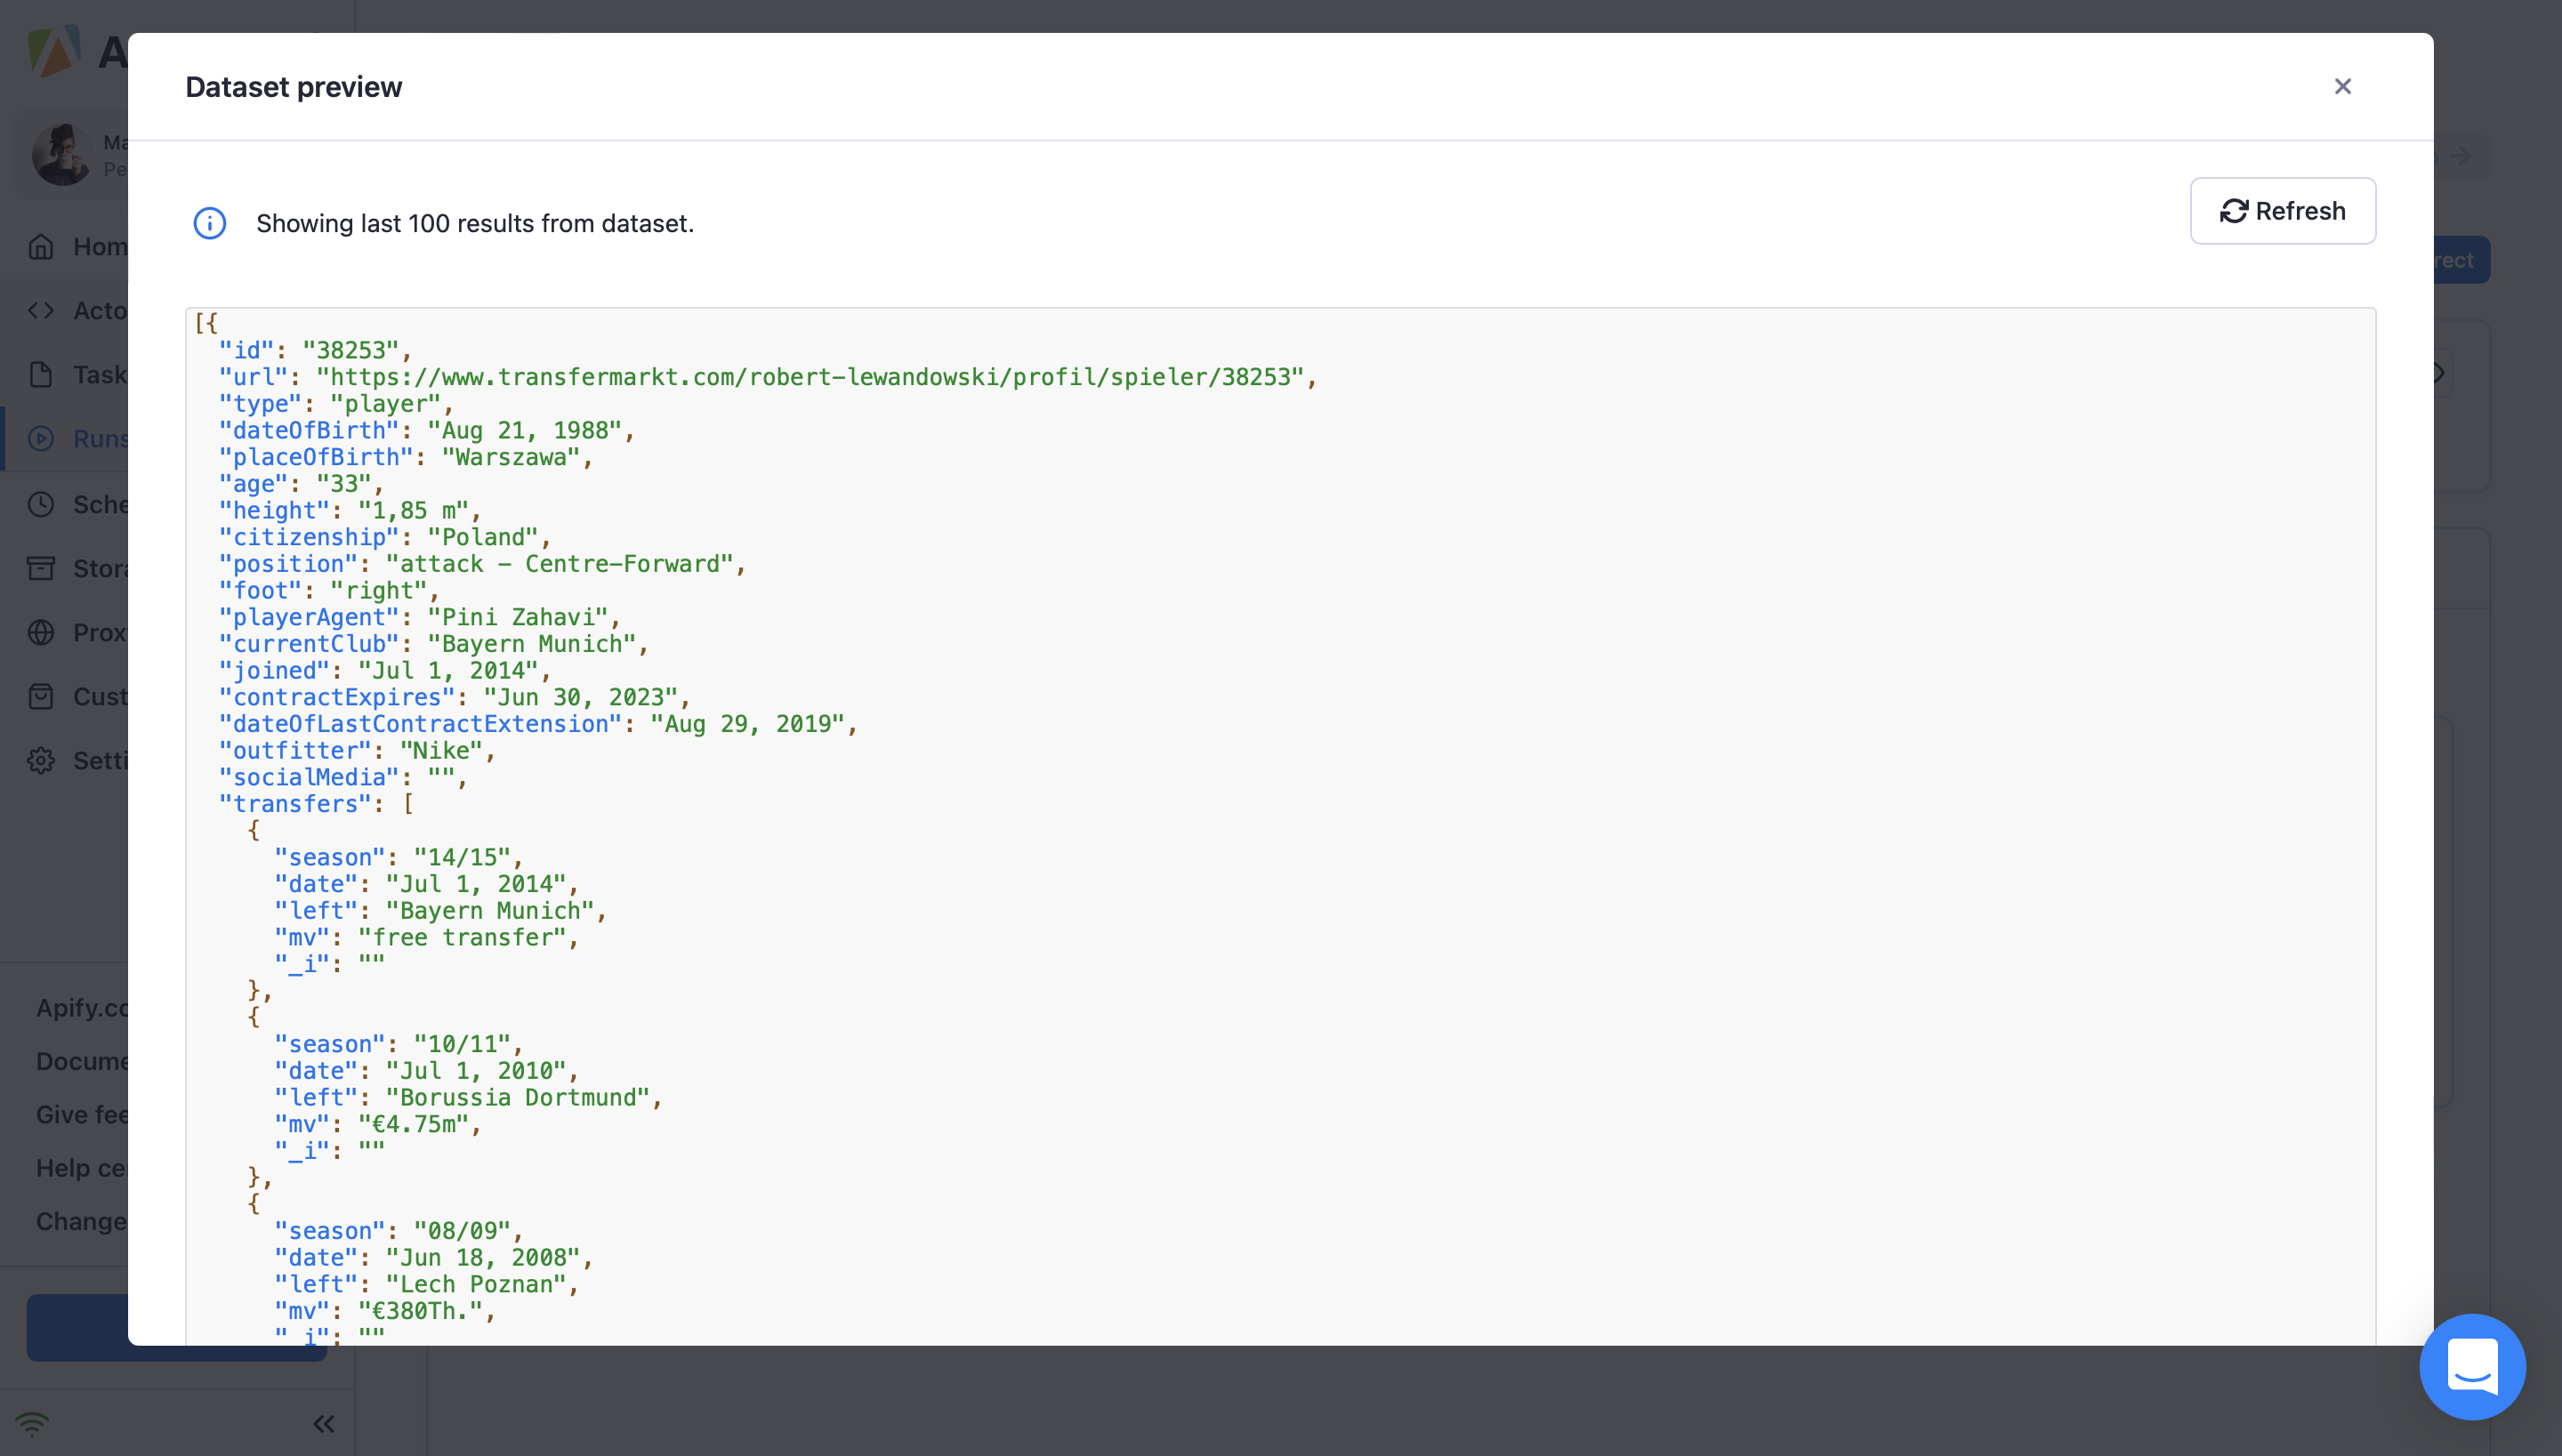 JSON preview of the data in a pop over panel.